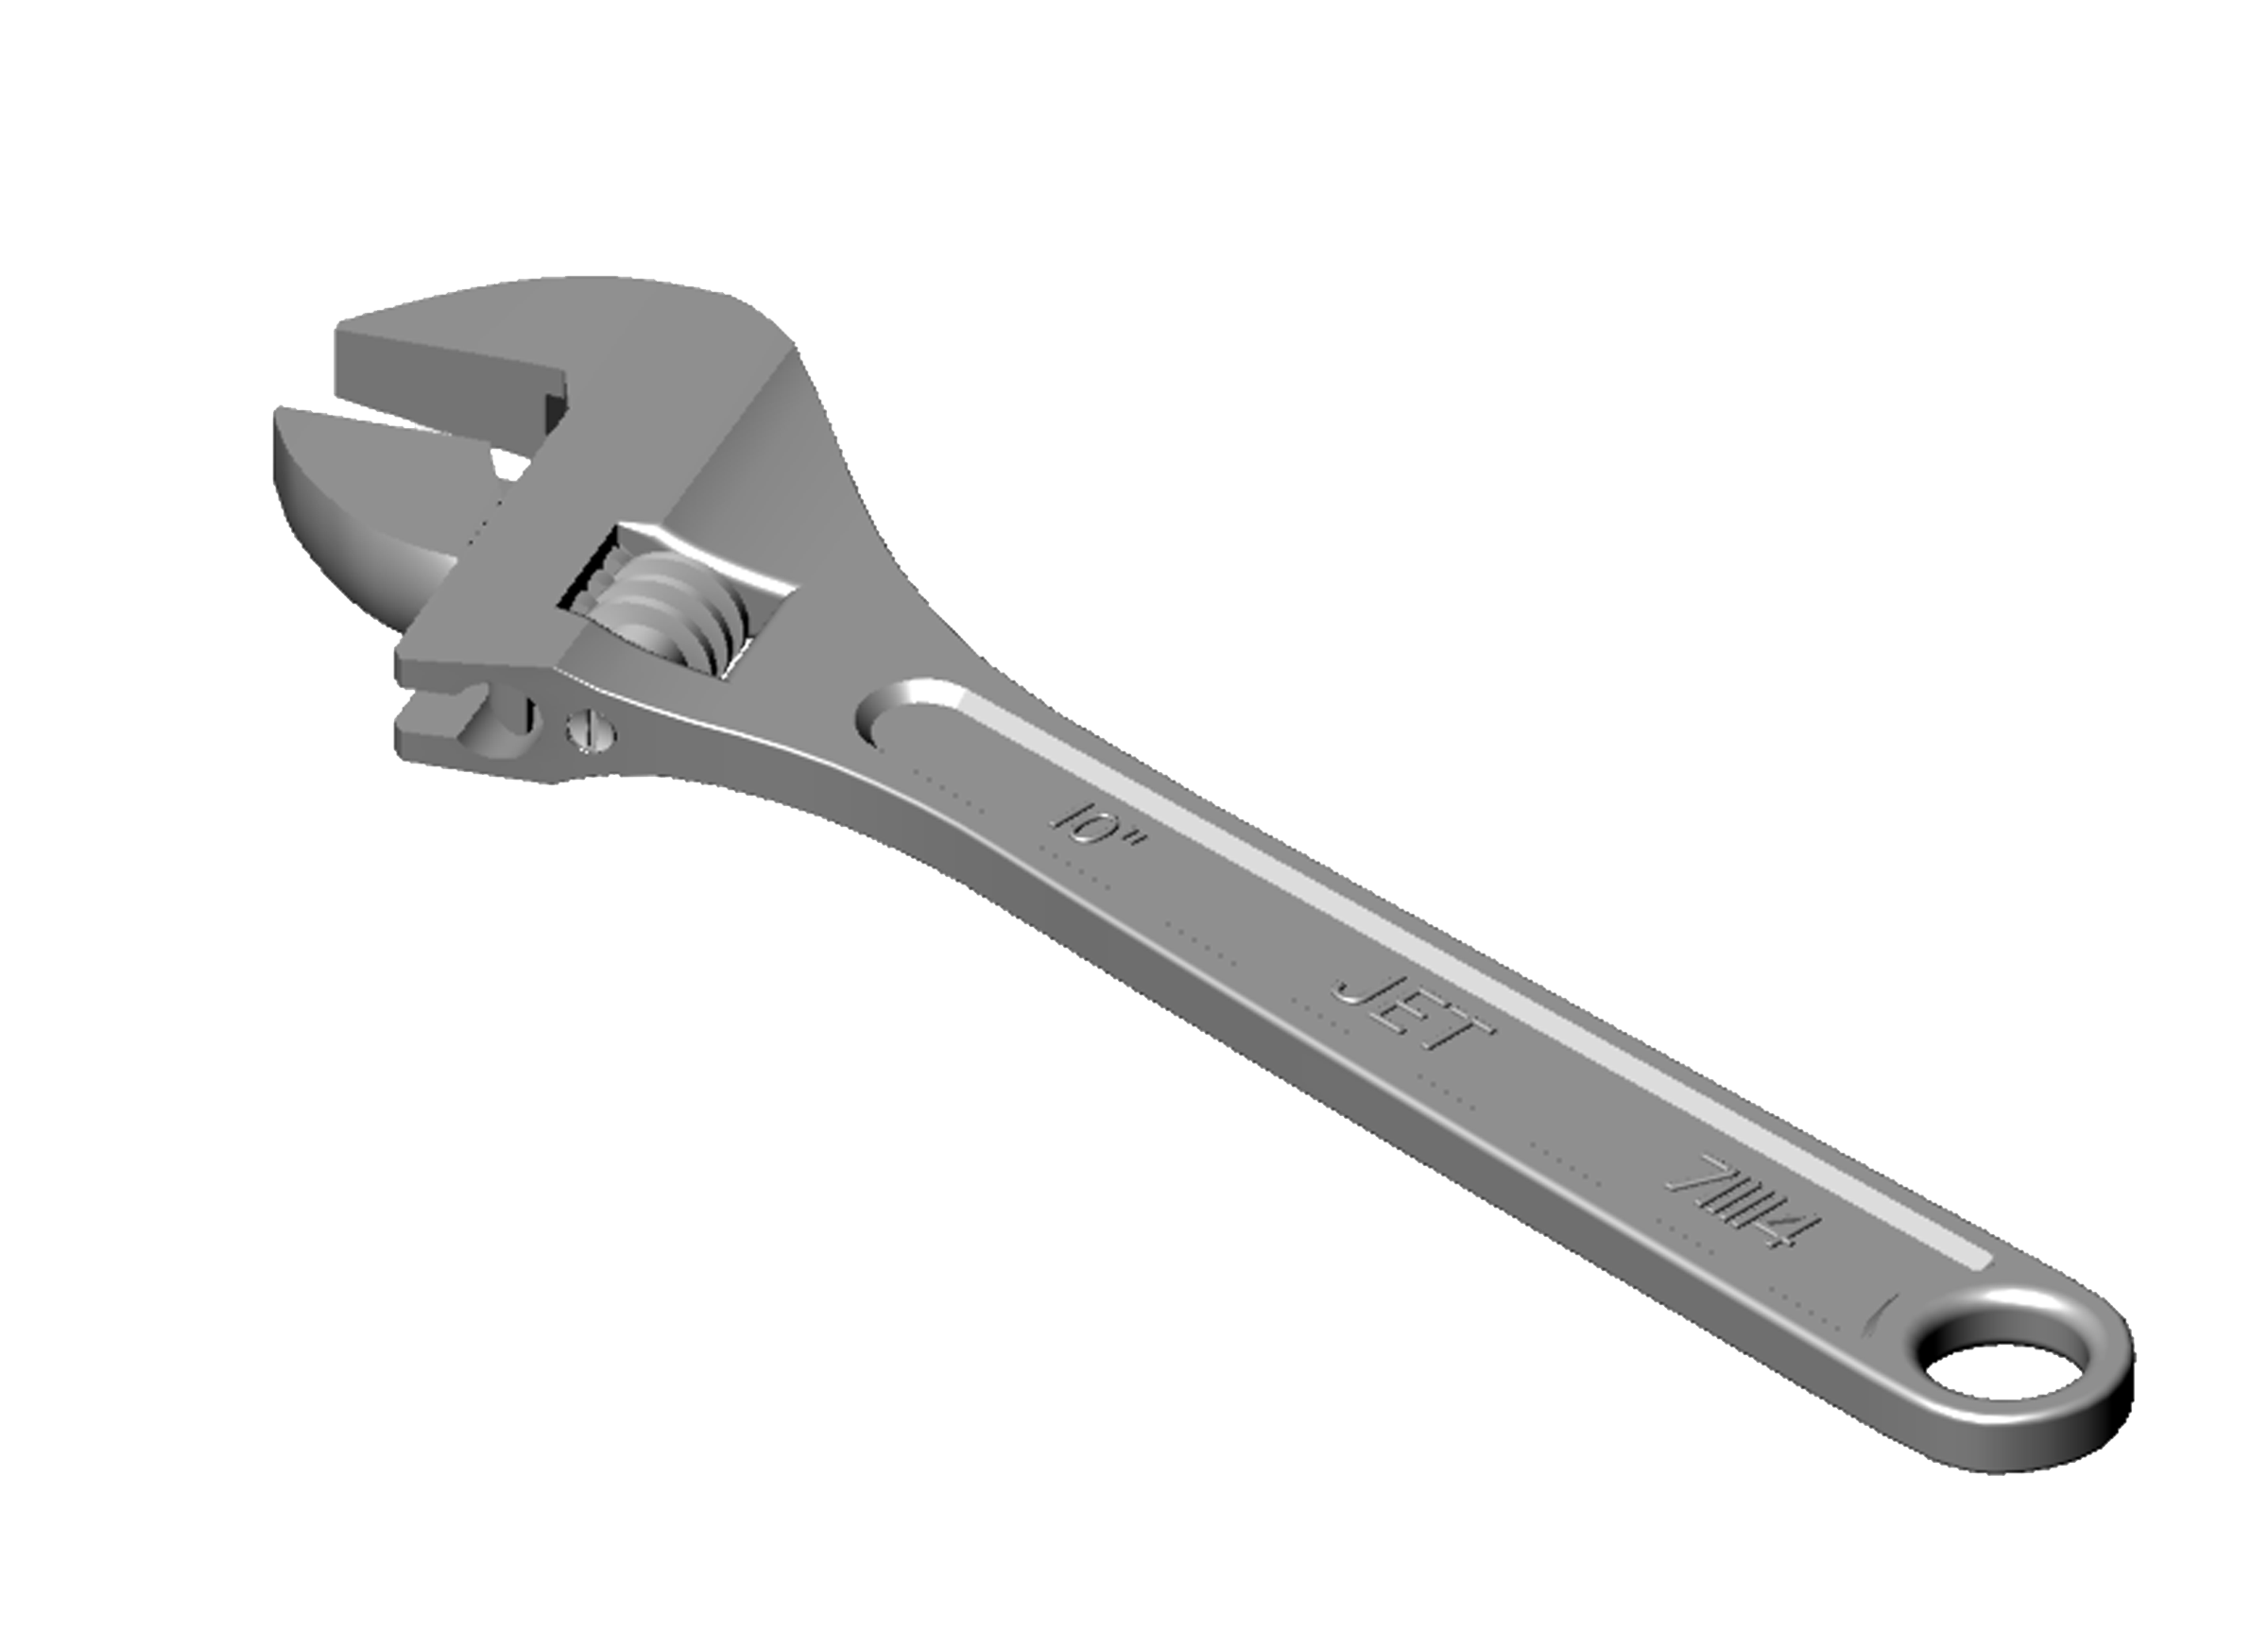 Png transparent images pluspng. Engine clipart wrench